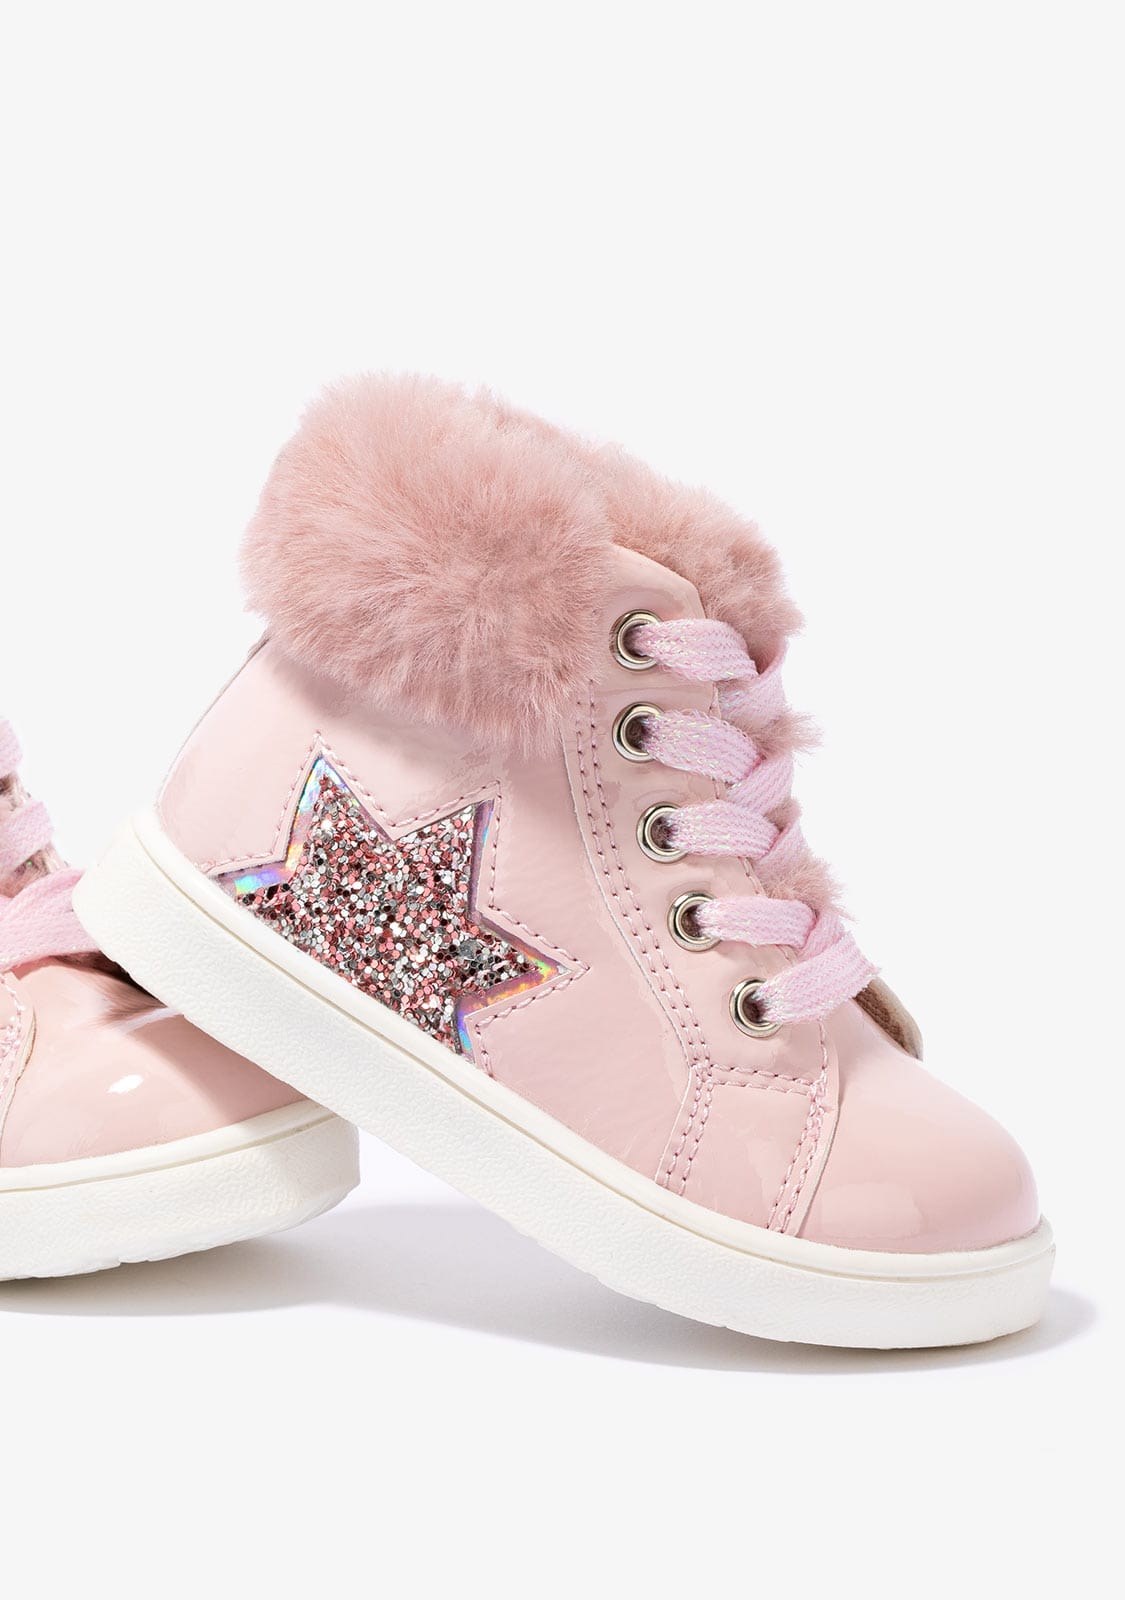 OSITO Shoes Baby's Pink Patent Ankle Boots With Glitter Star